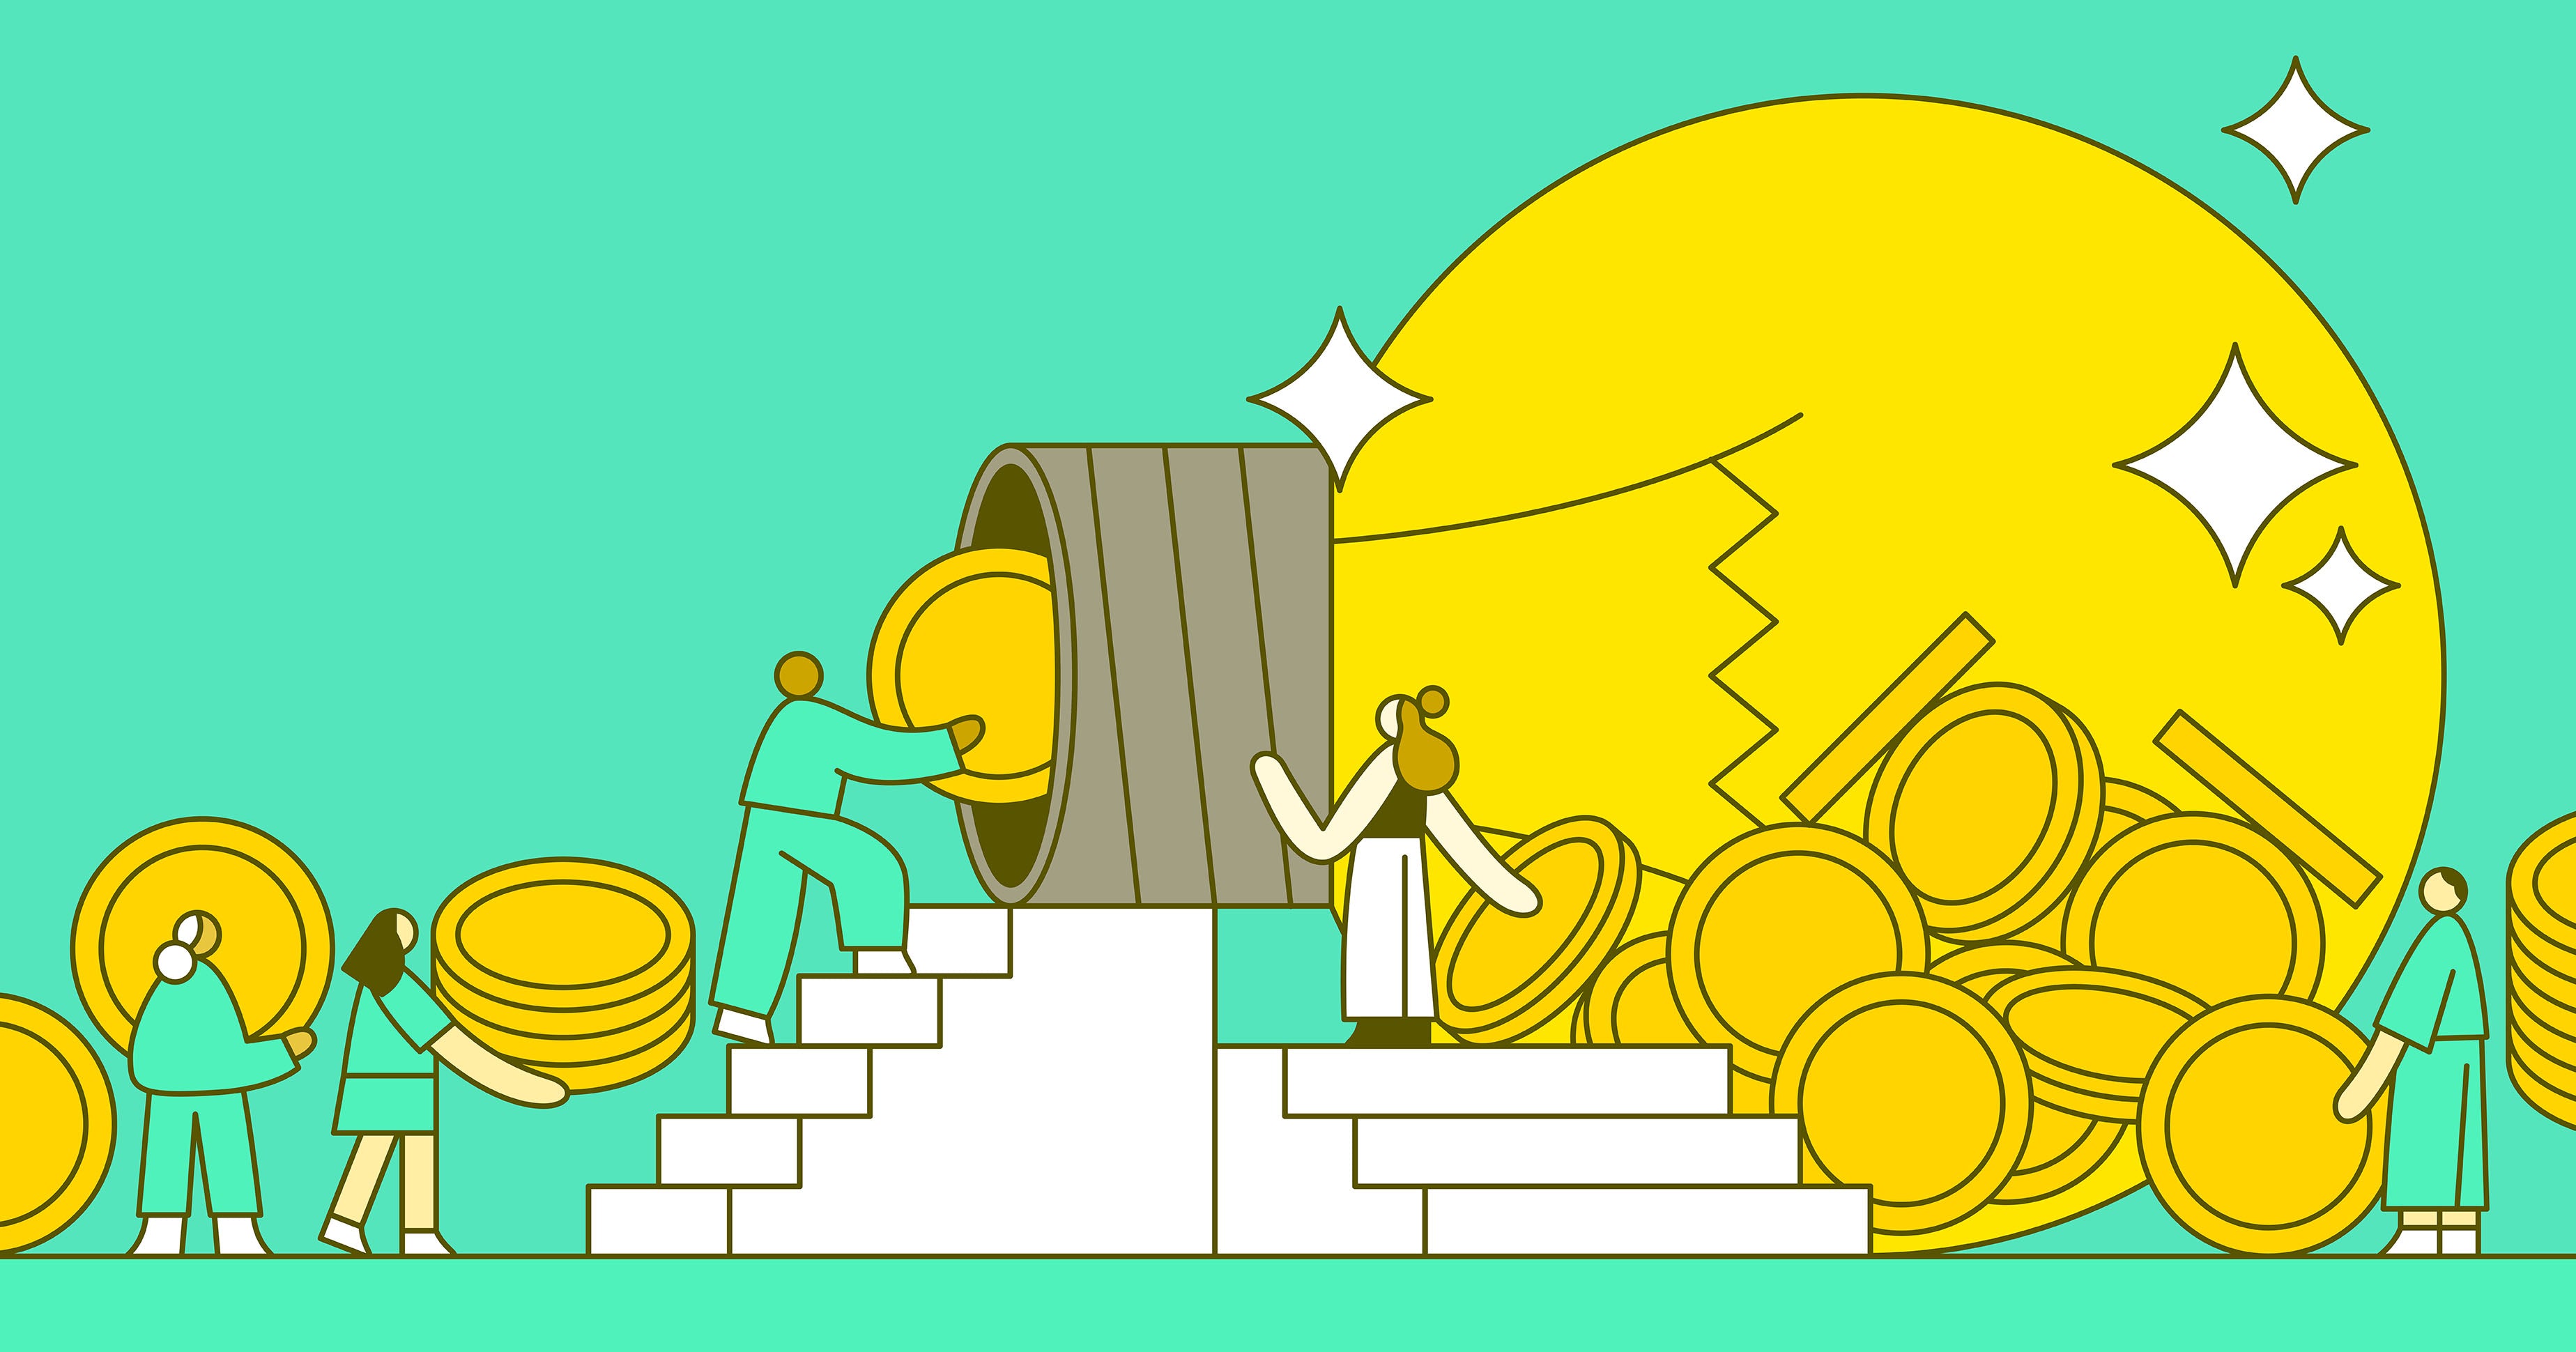 Illustration of two people climbing stairs and slotting coins into a lightbulb to represent crowdfunding a business idea